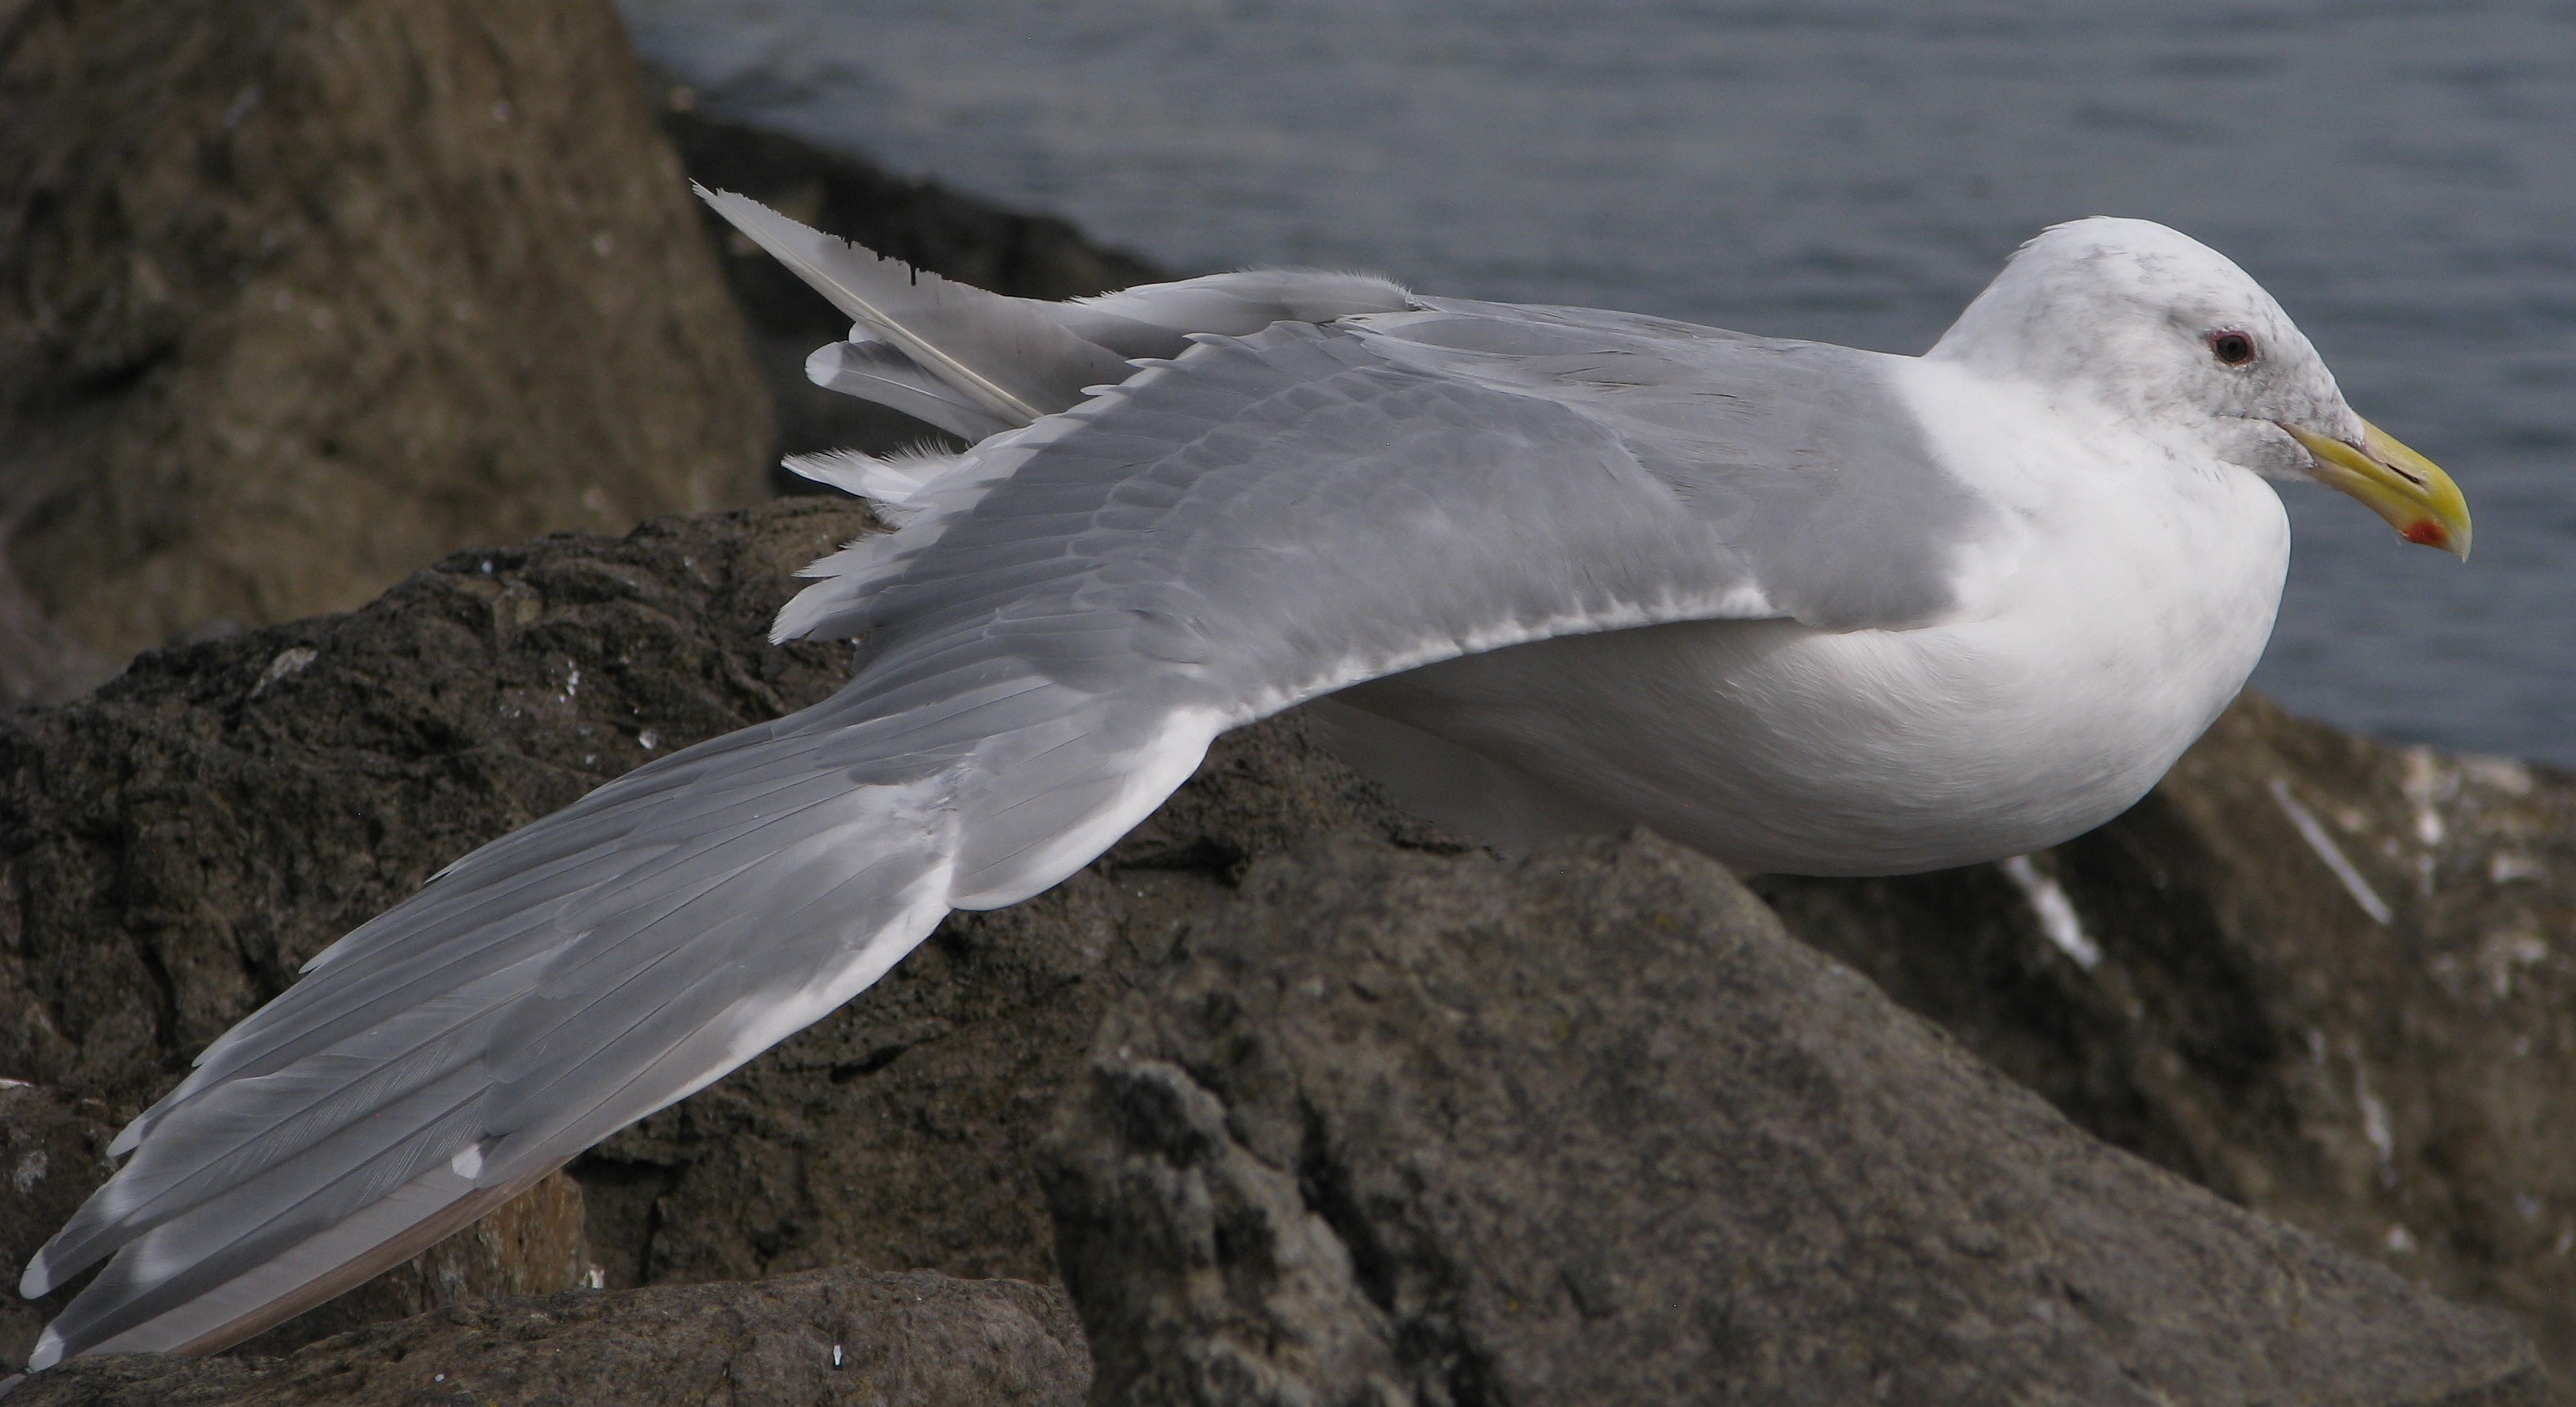 Herring gull on rocky shoreline, with right wing stretched out.